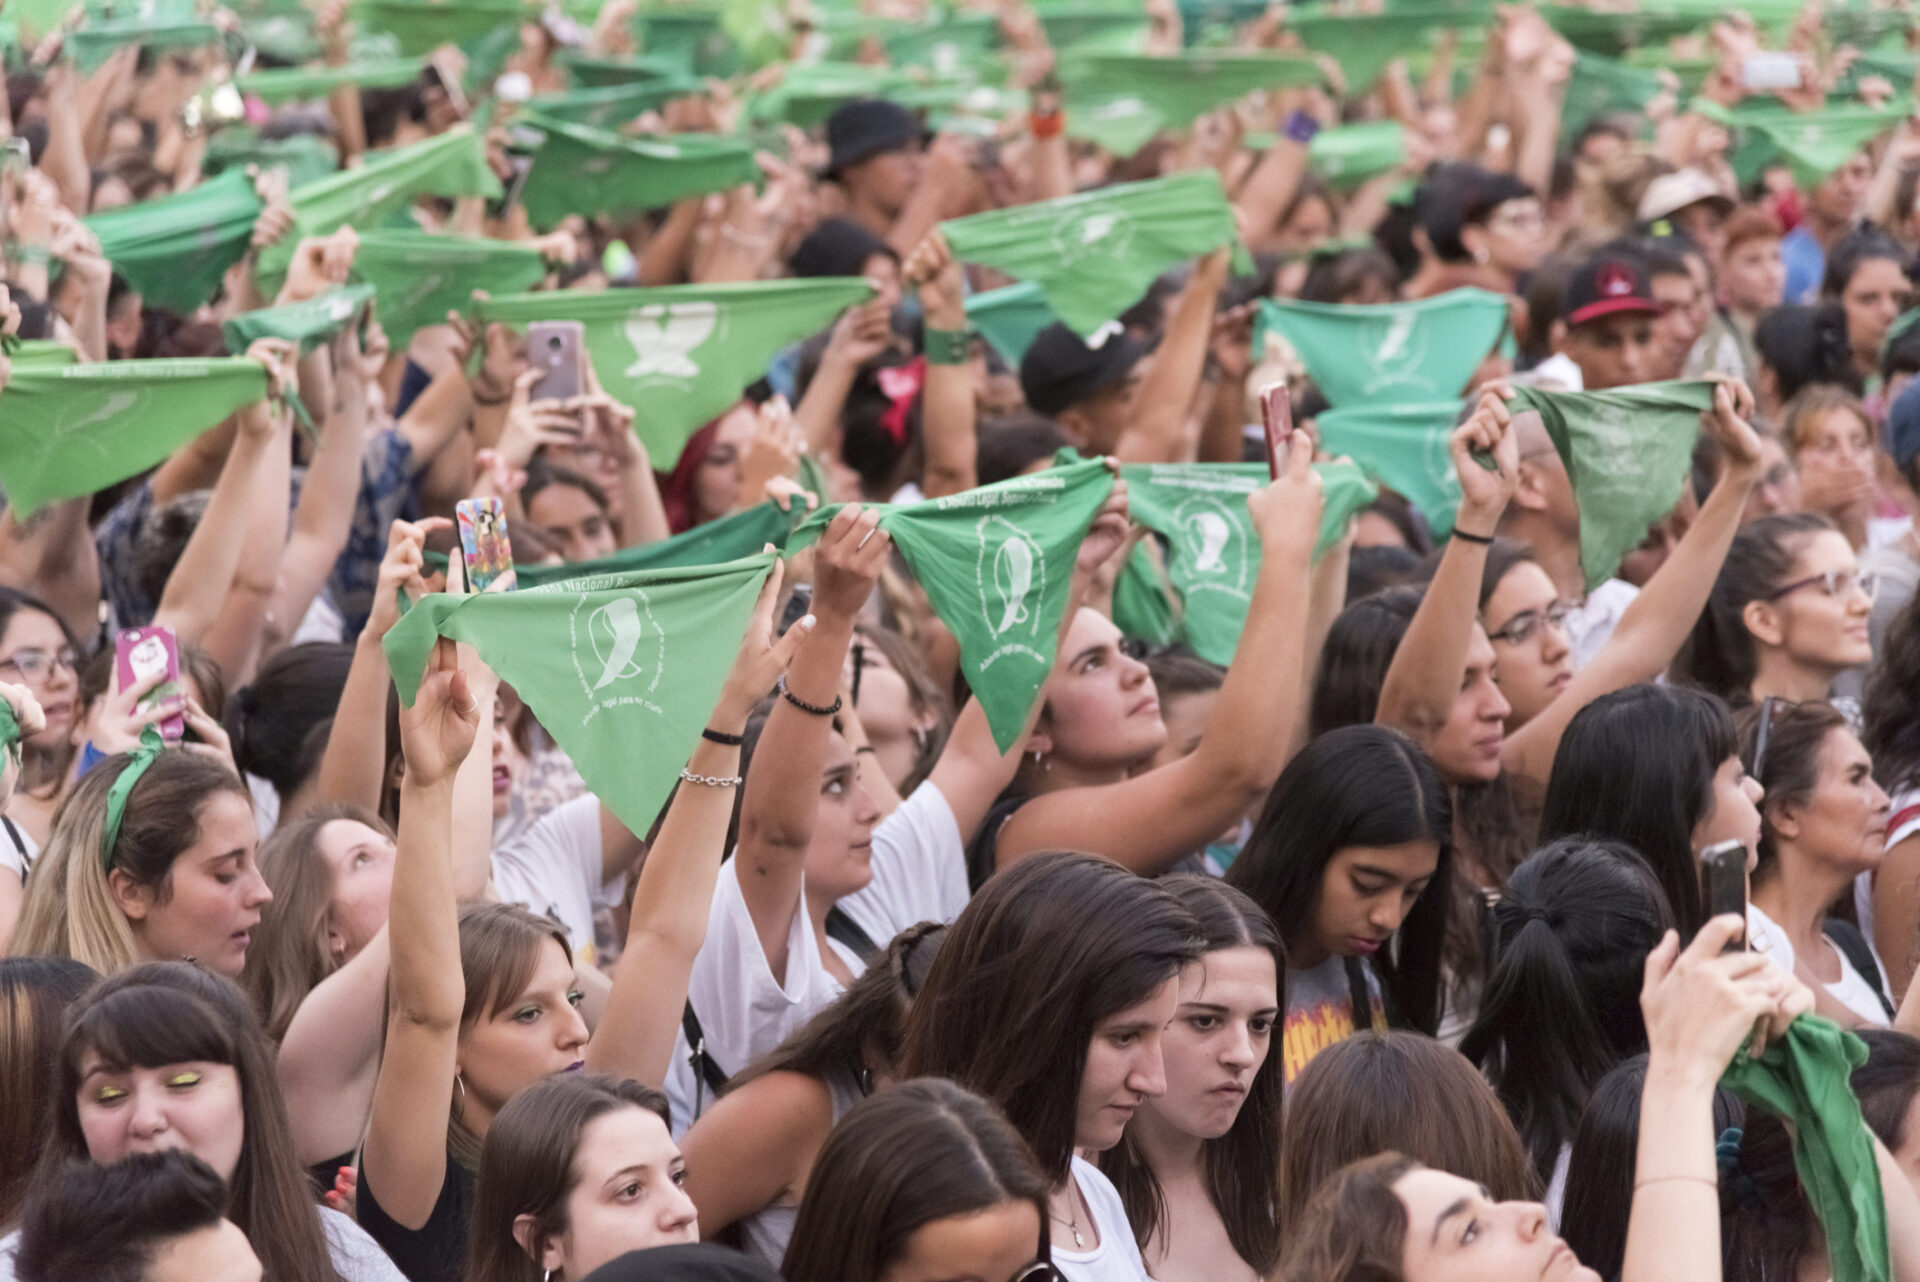 Women at a rally on February 19, 2020, in Buenos Aires, Argentina, raise green handkerchiefs, a symbol of support for legal, safe, and free abortion in Latin America. © Carolina Jaramillo | Dreamstime.com